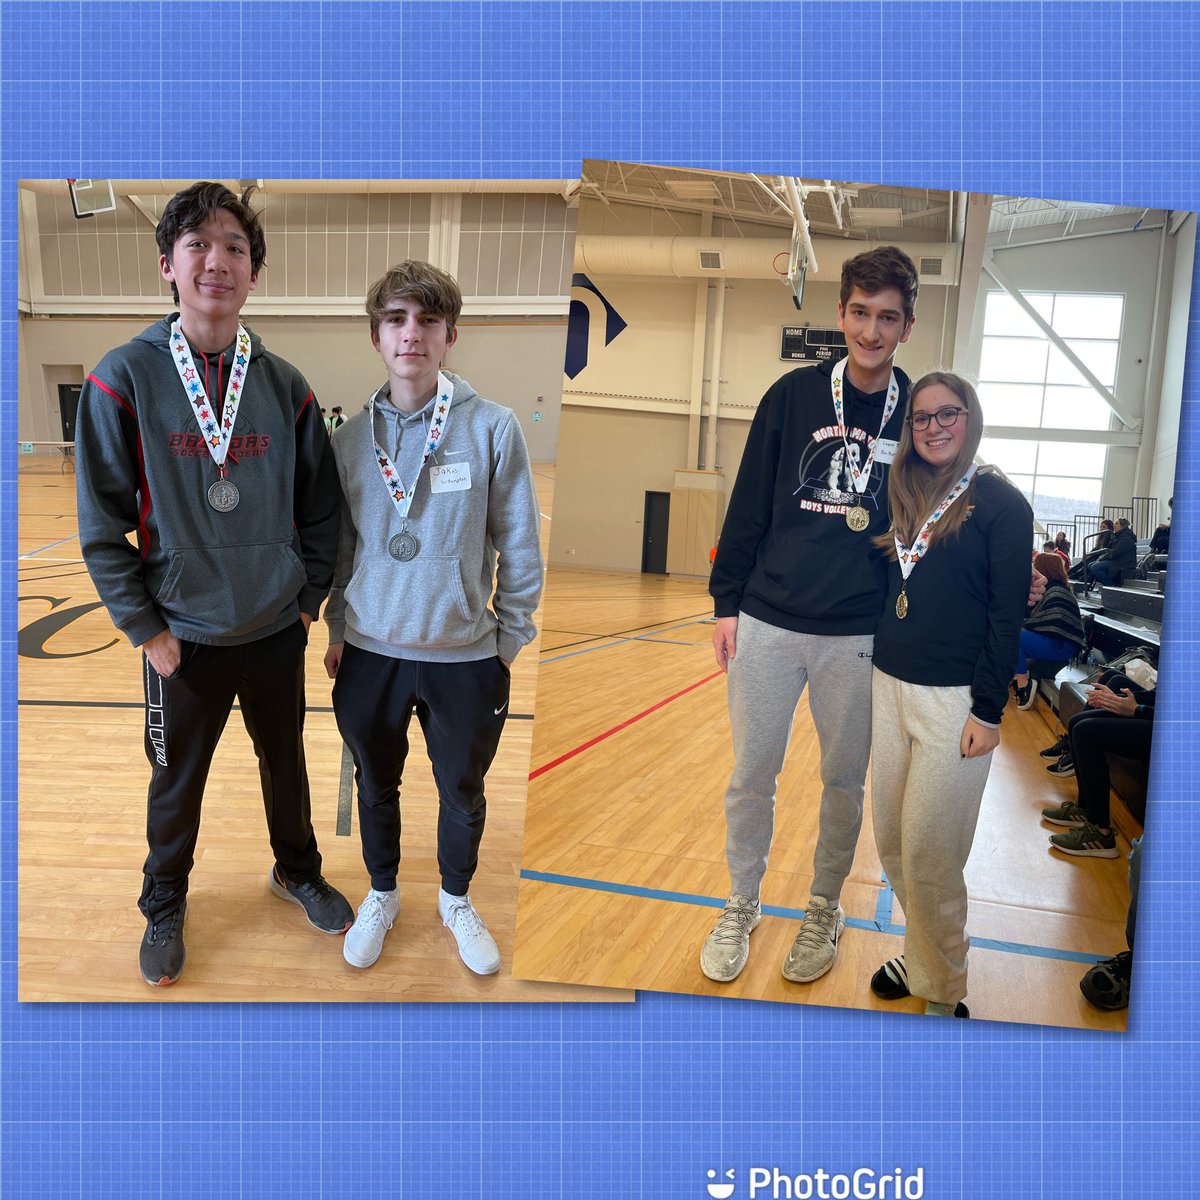 Congratulations to Brayden and Jake for their 2nd place finish in Scrambler, and to Maddie and Logan for their 1st place finish in Trajectory at the Science Olympiad EPC Tournament!! Way to go!! On to regionals! @NASDschoolsSupt @NAHS1619  @NASDschools #scienceolympiad #kkidpride